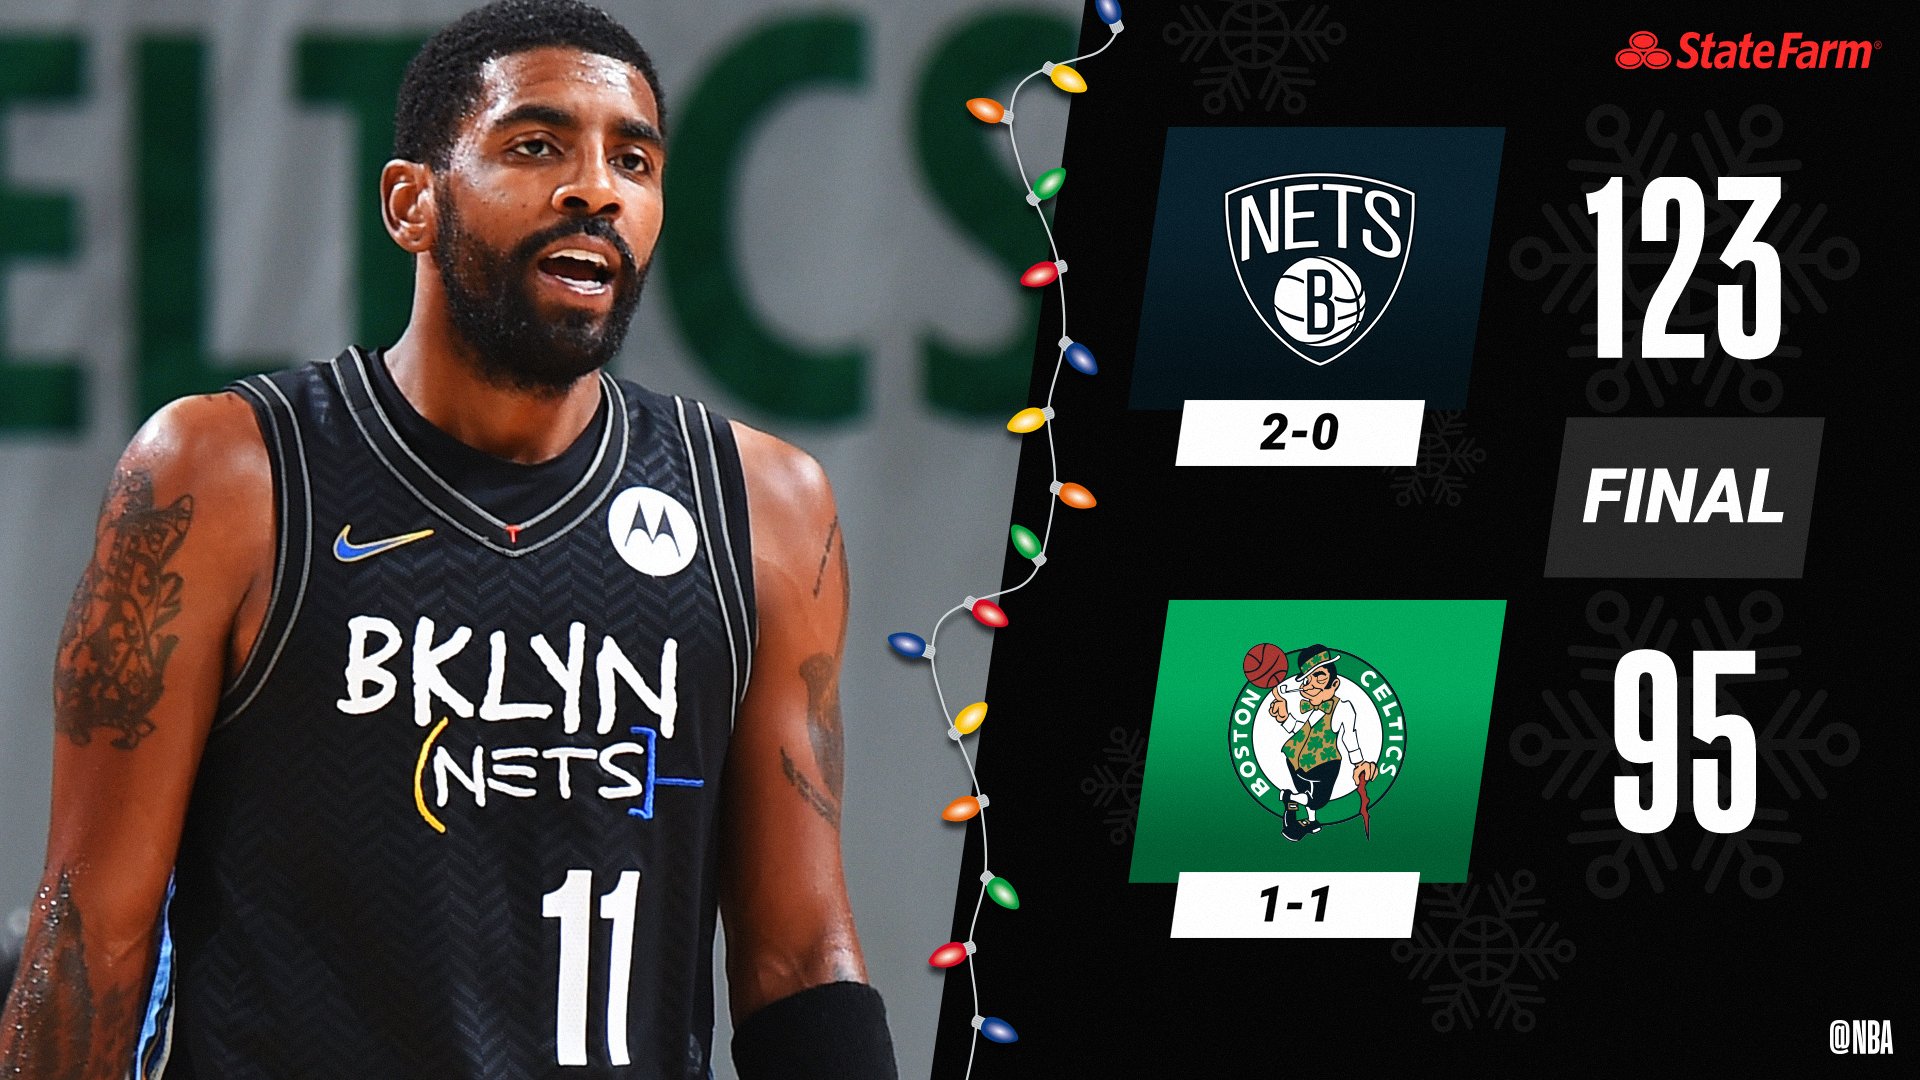 Kyrie Irving and Nets beat Celtics